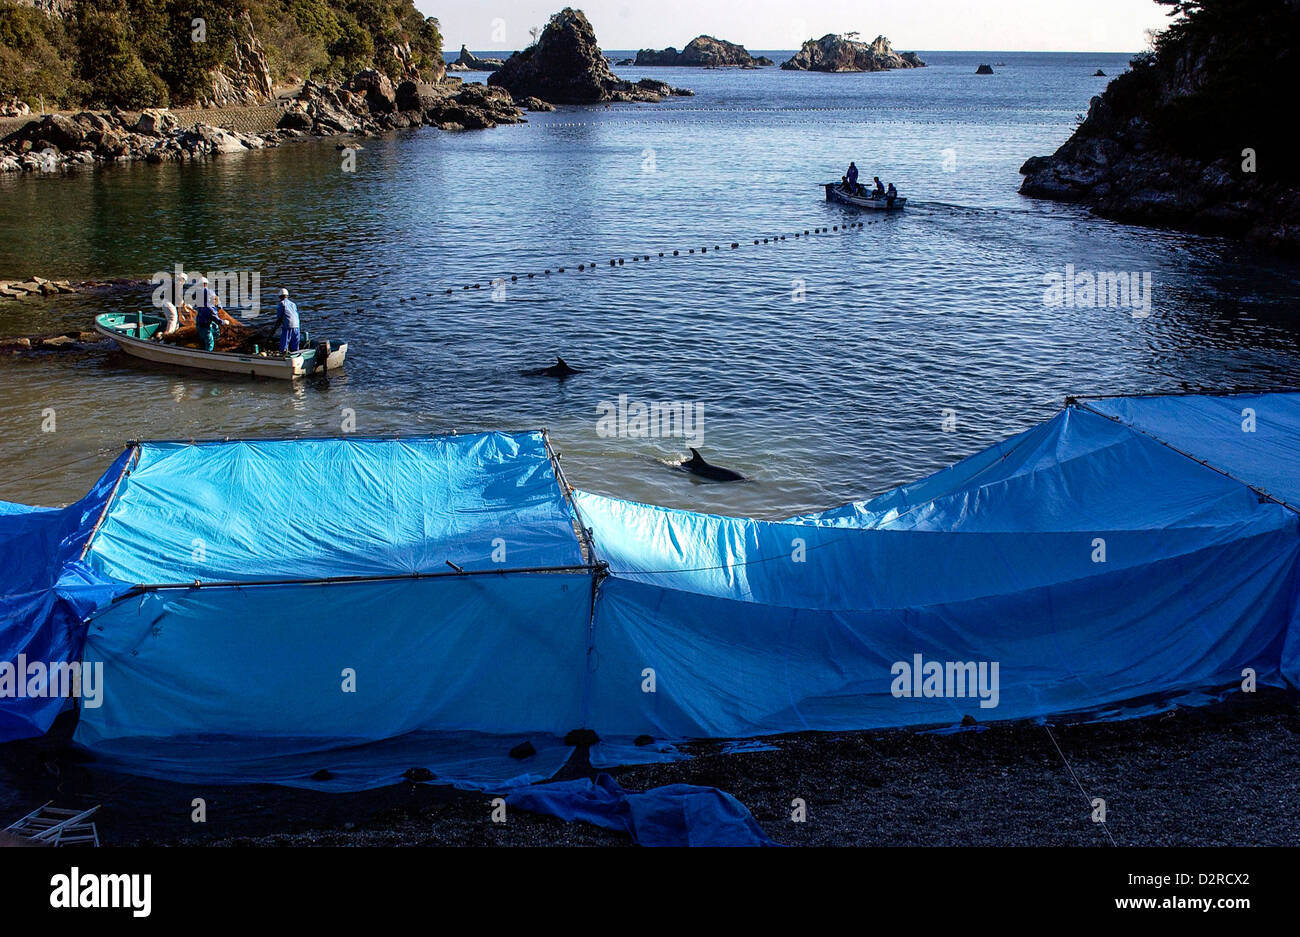 Fishermen in boats drive a pod of dolphins into the beach in the cove in Taiji, Wakayama, Japan Stock Photo